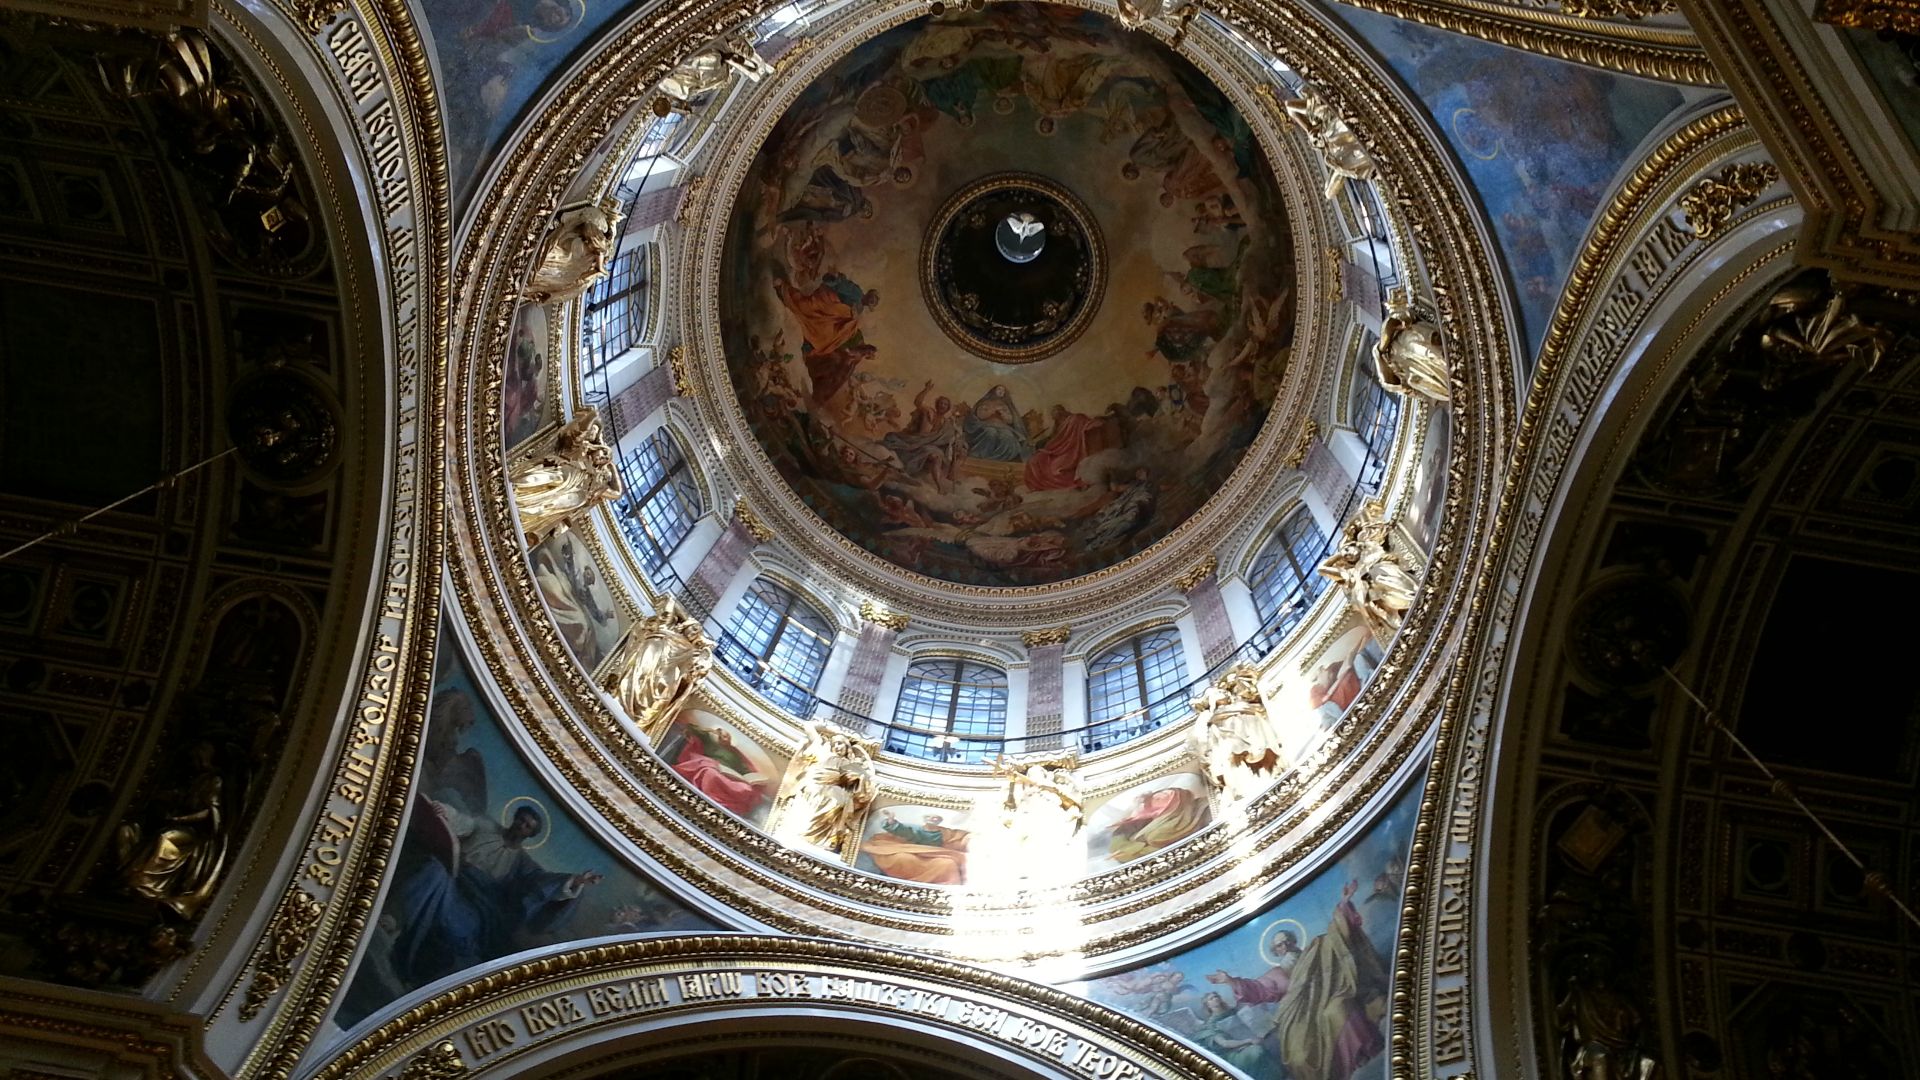 St. Isaac's Dome